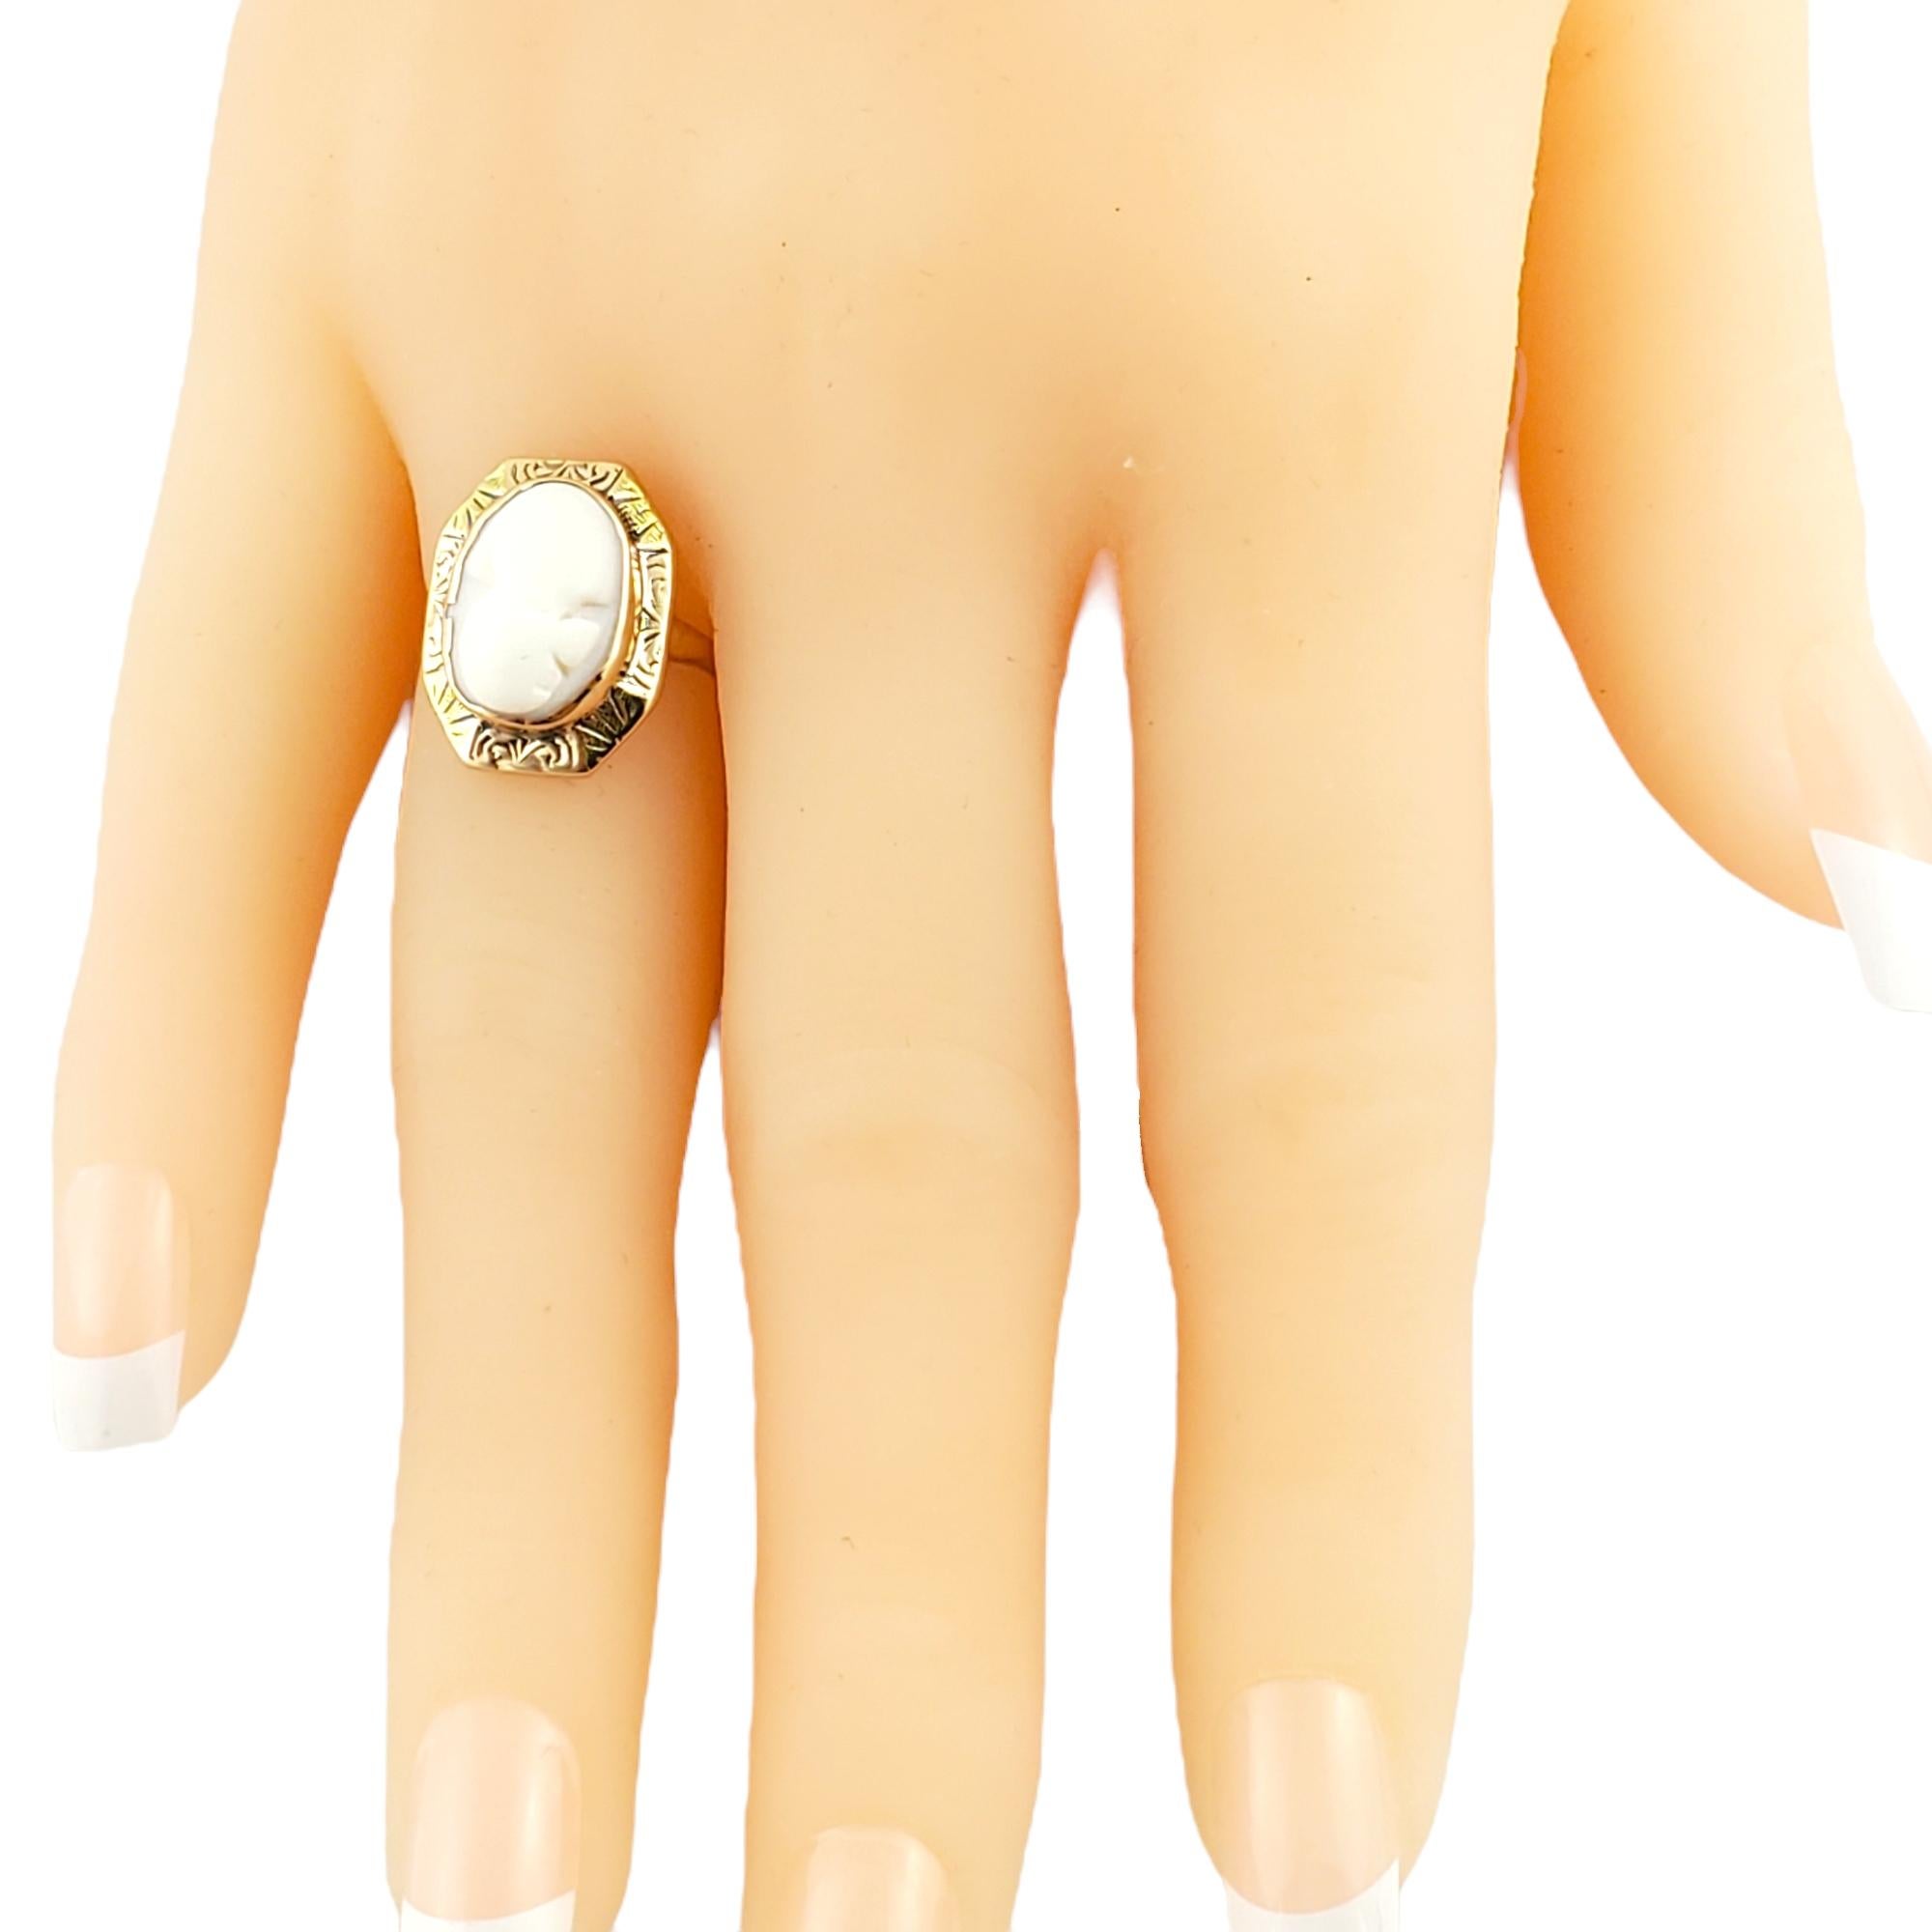 Vintage 10K Yellow Gold Cameo Ring Size 4.5

Beautifully detailed 14K yellow gold cameo ring!

Ring size: 4.5
Shank: 1 mm
Oval cameo: 13.5 mm X 18 mm

Weight: 2.2 g/ 1.4 dwt

Hallmark: 10K

Very good condition, professionally polished.

Will come